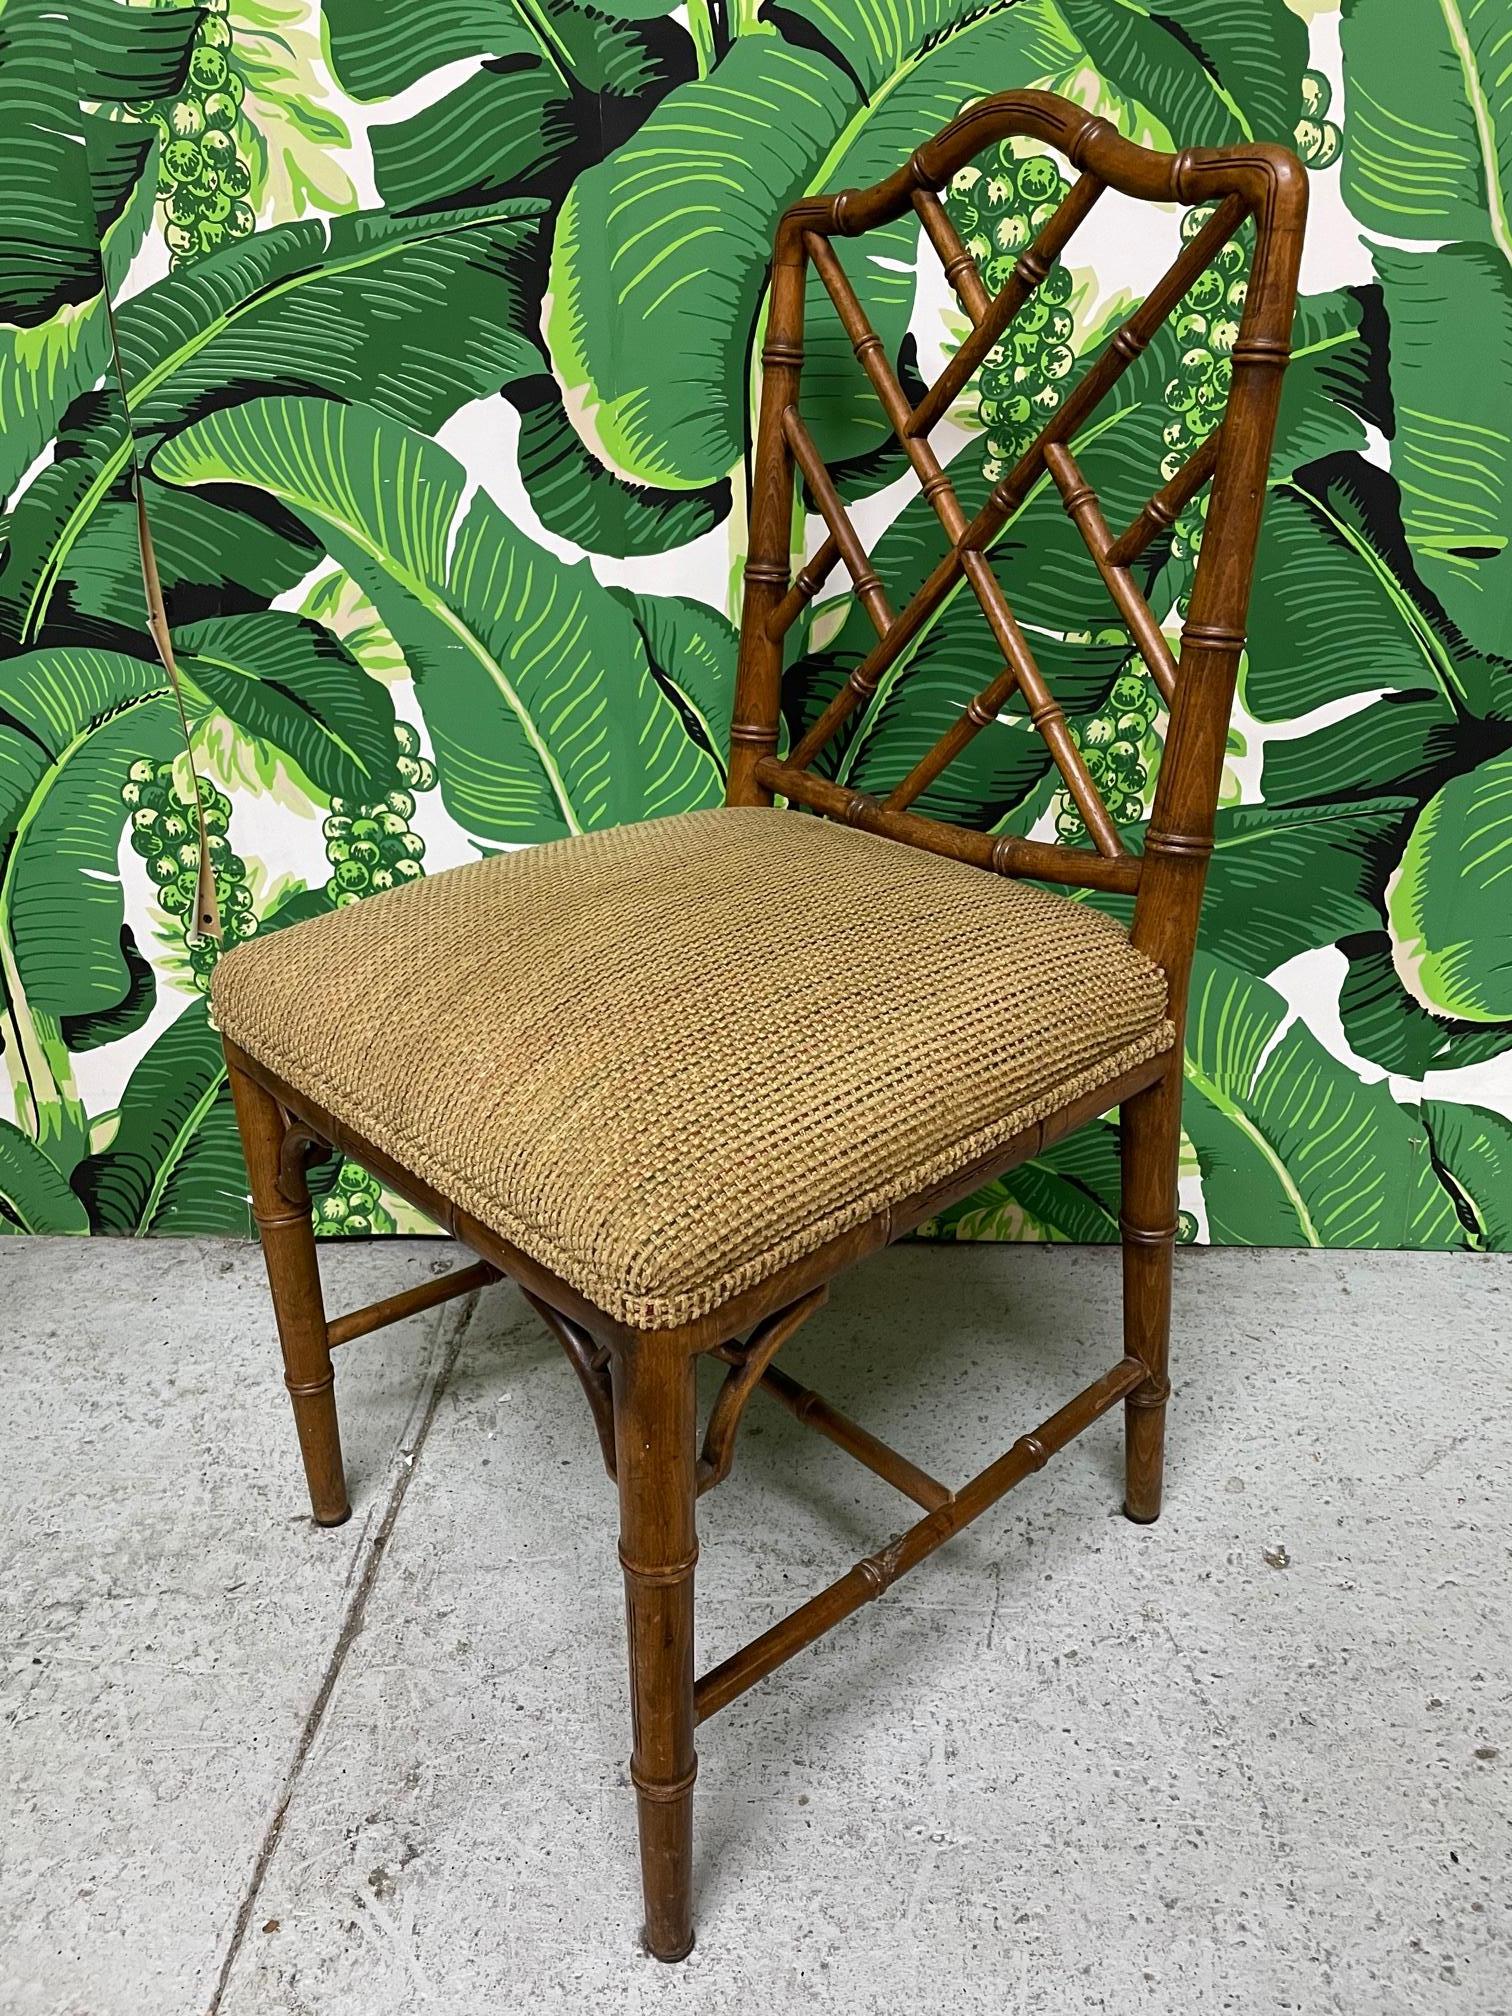 Set of six faux bamboo dining chairs in chinoiserie style by Century Chair Company. Deep brown stained finish with neutral upholstery. Very good condition with only very minor imperfections consistent with age.